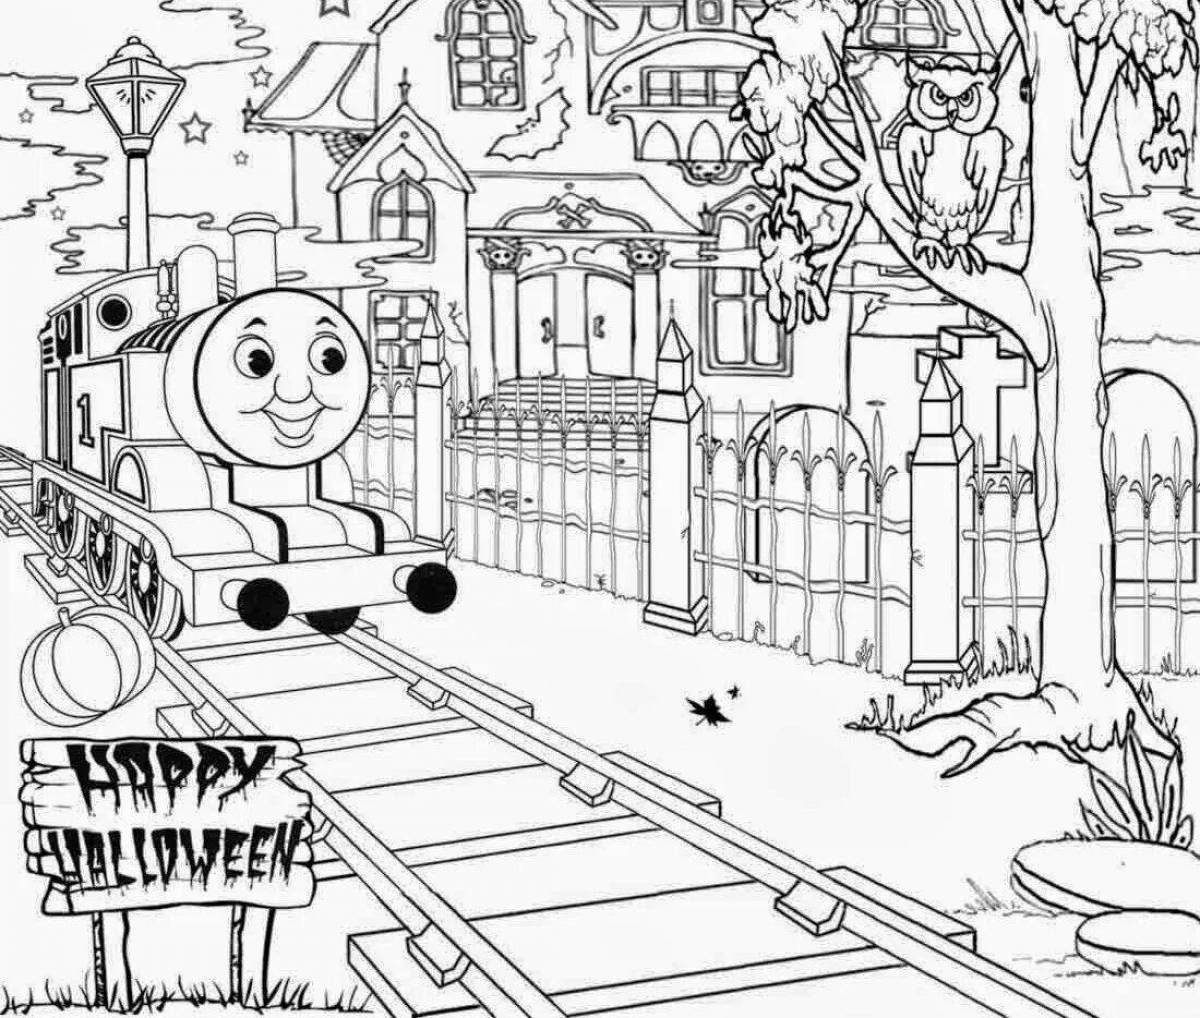 Spectral ghost train coloring page